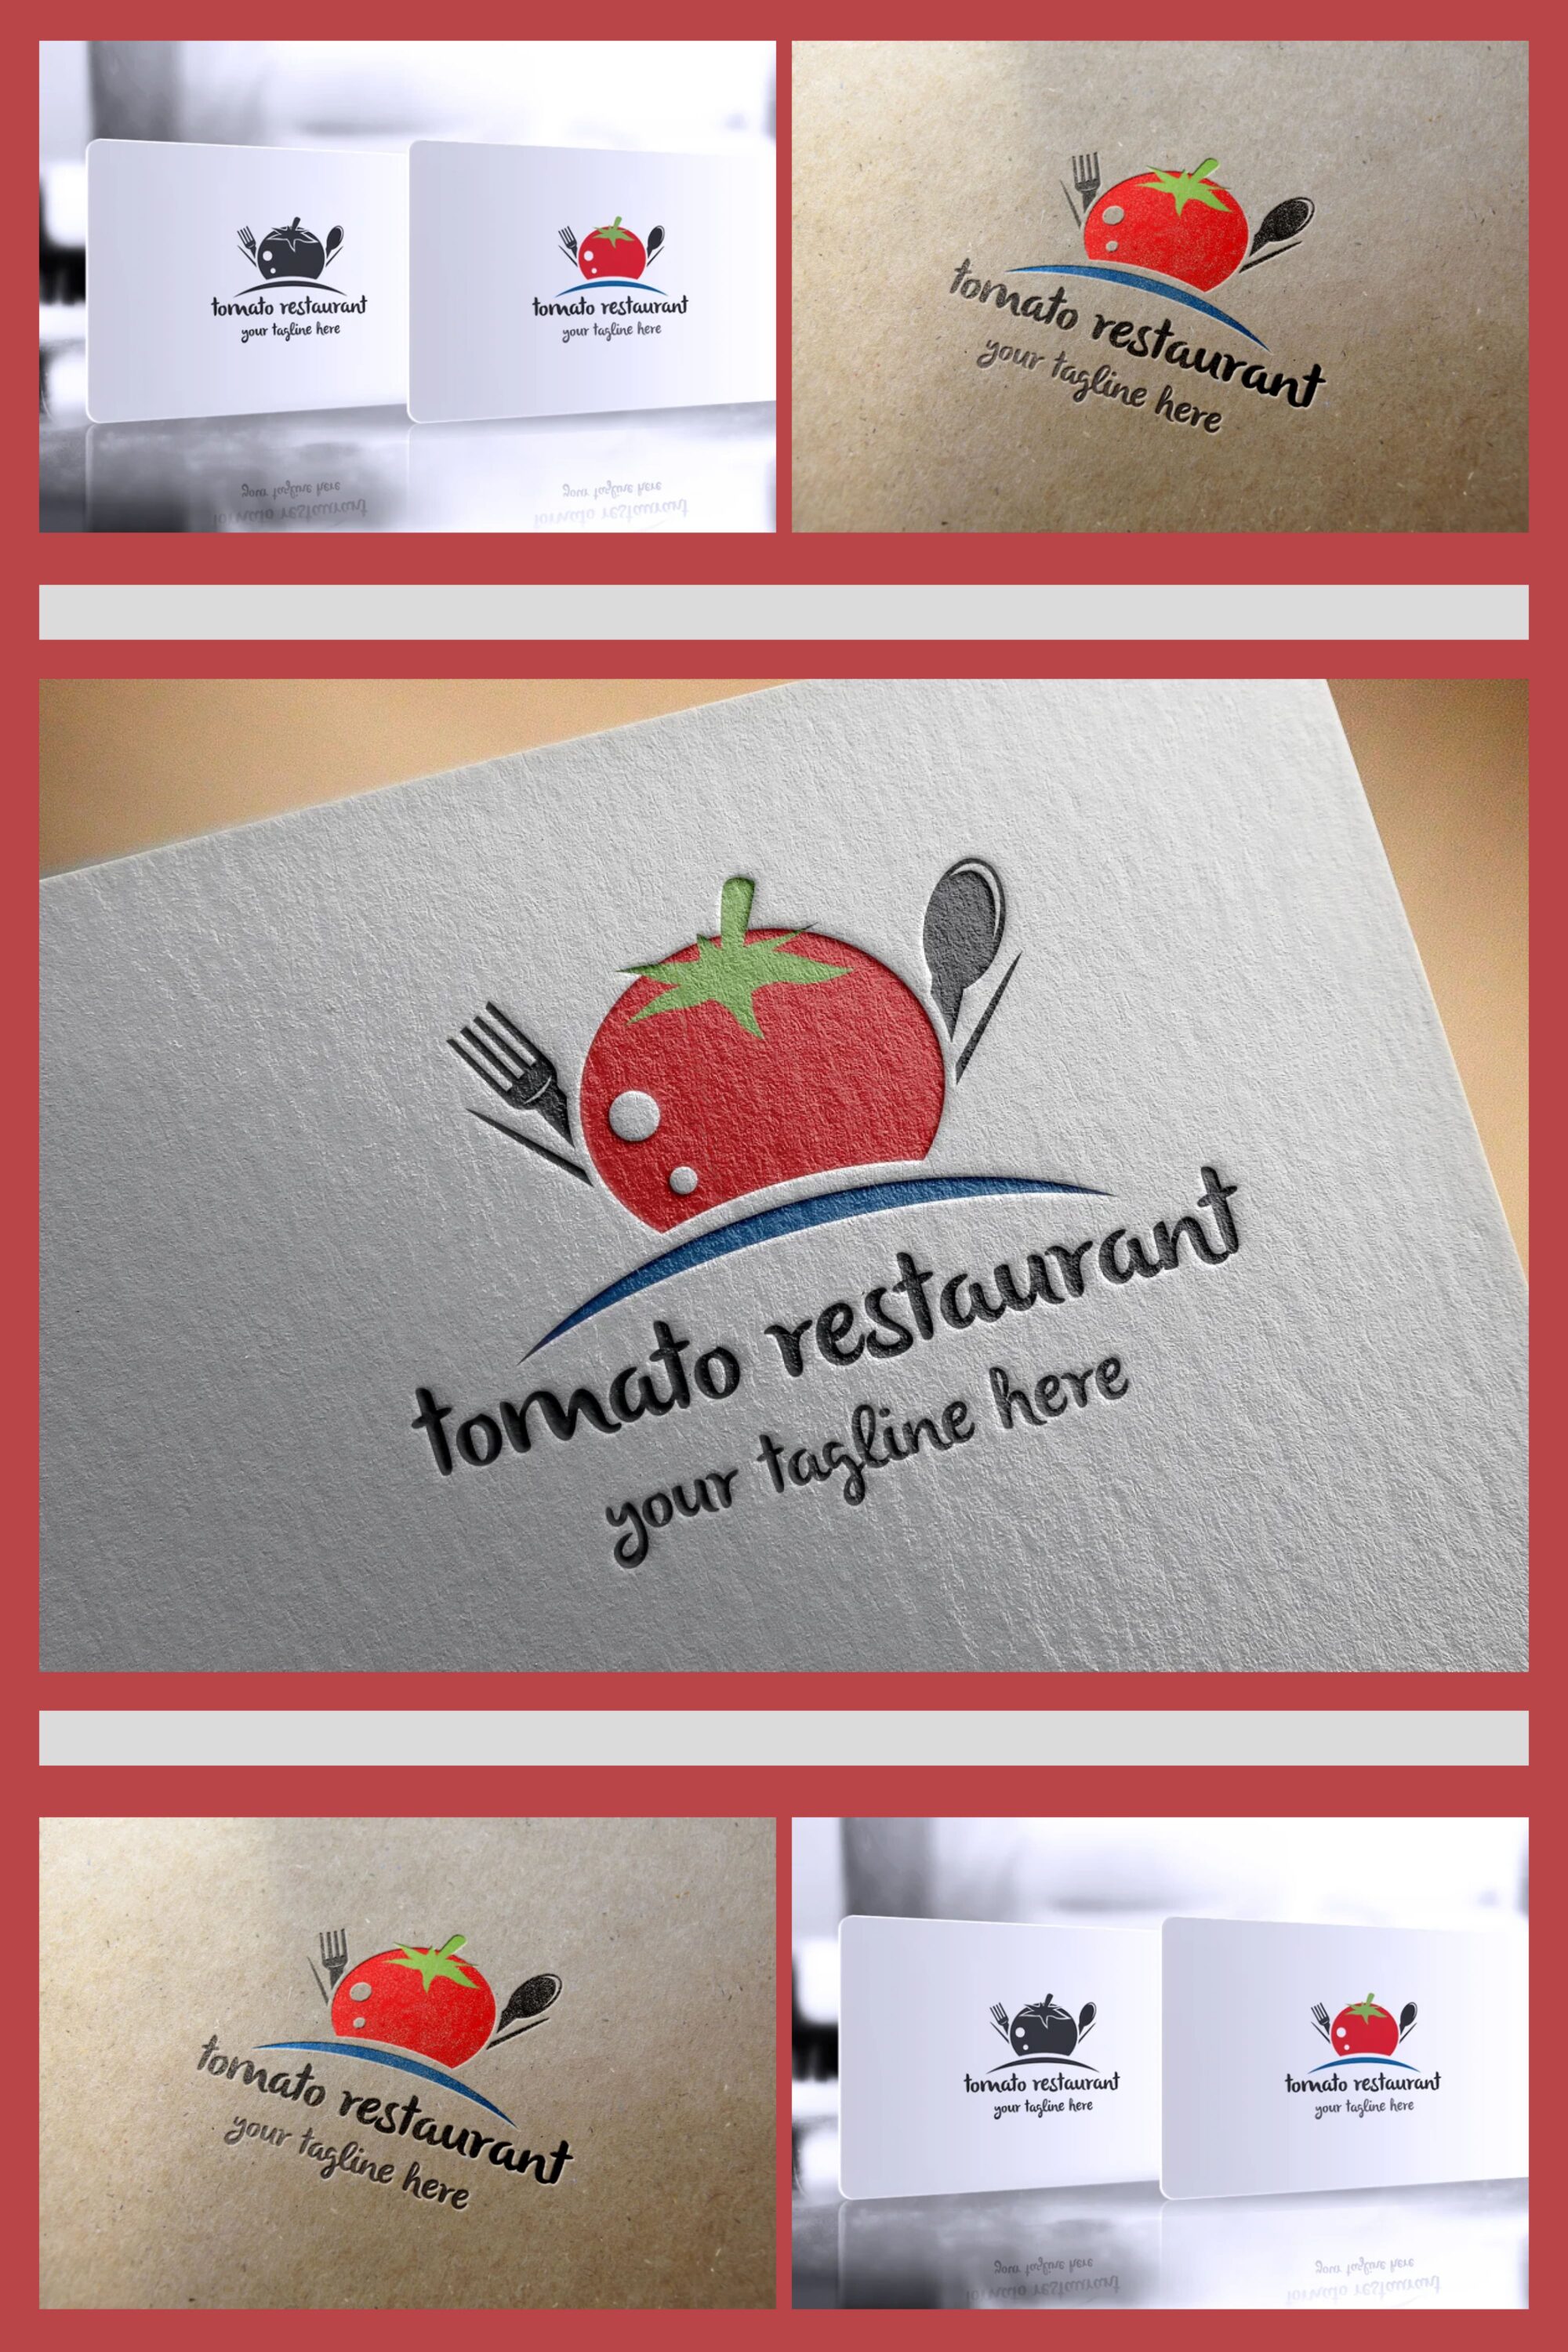 Food logo for the different textures.